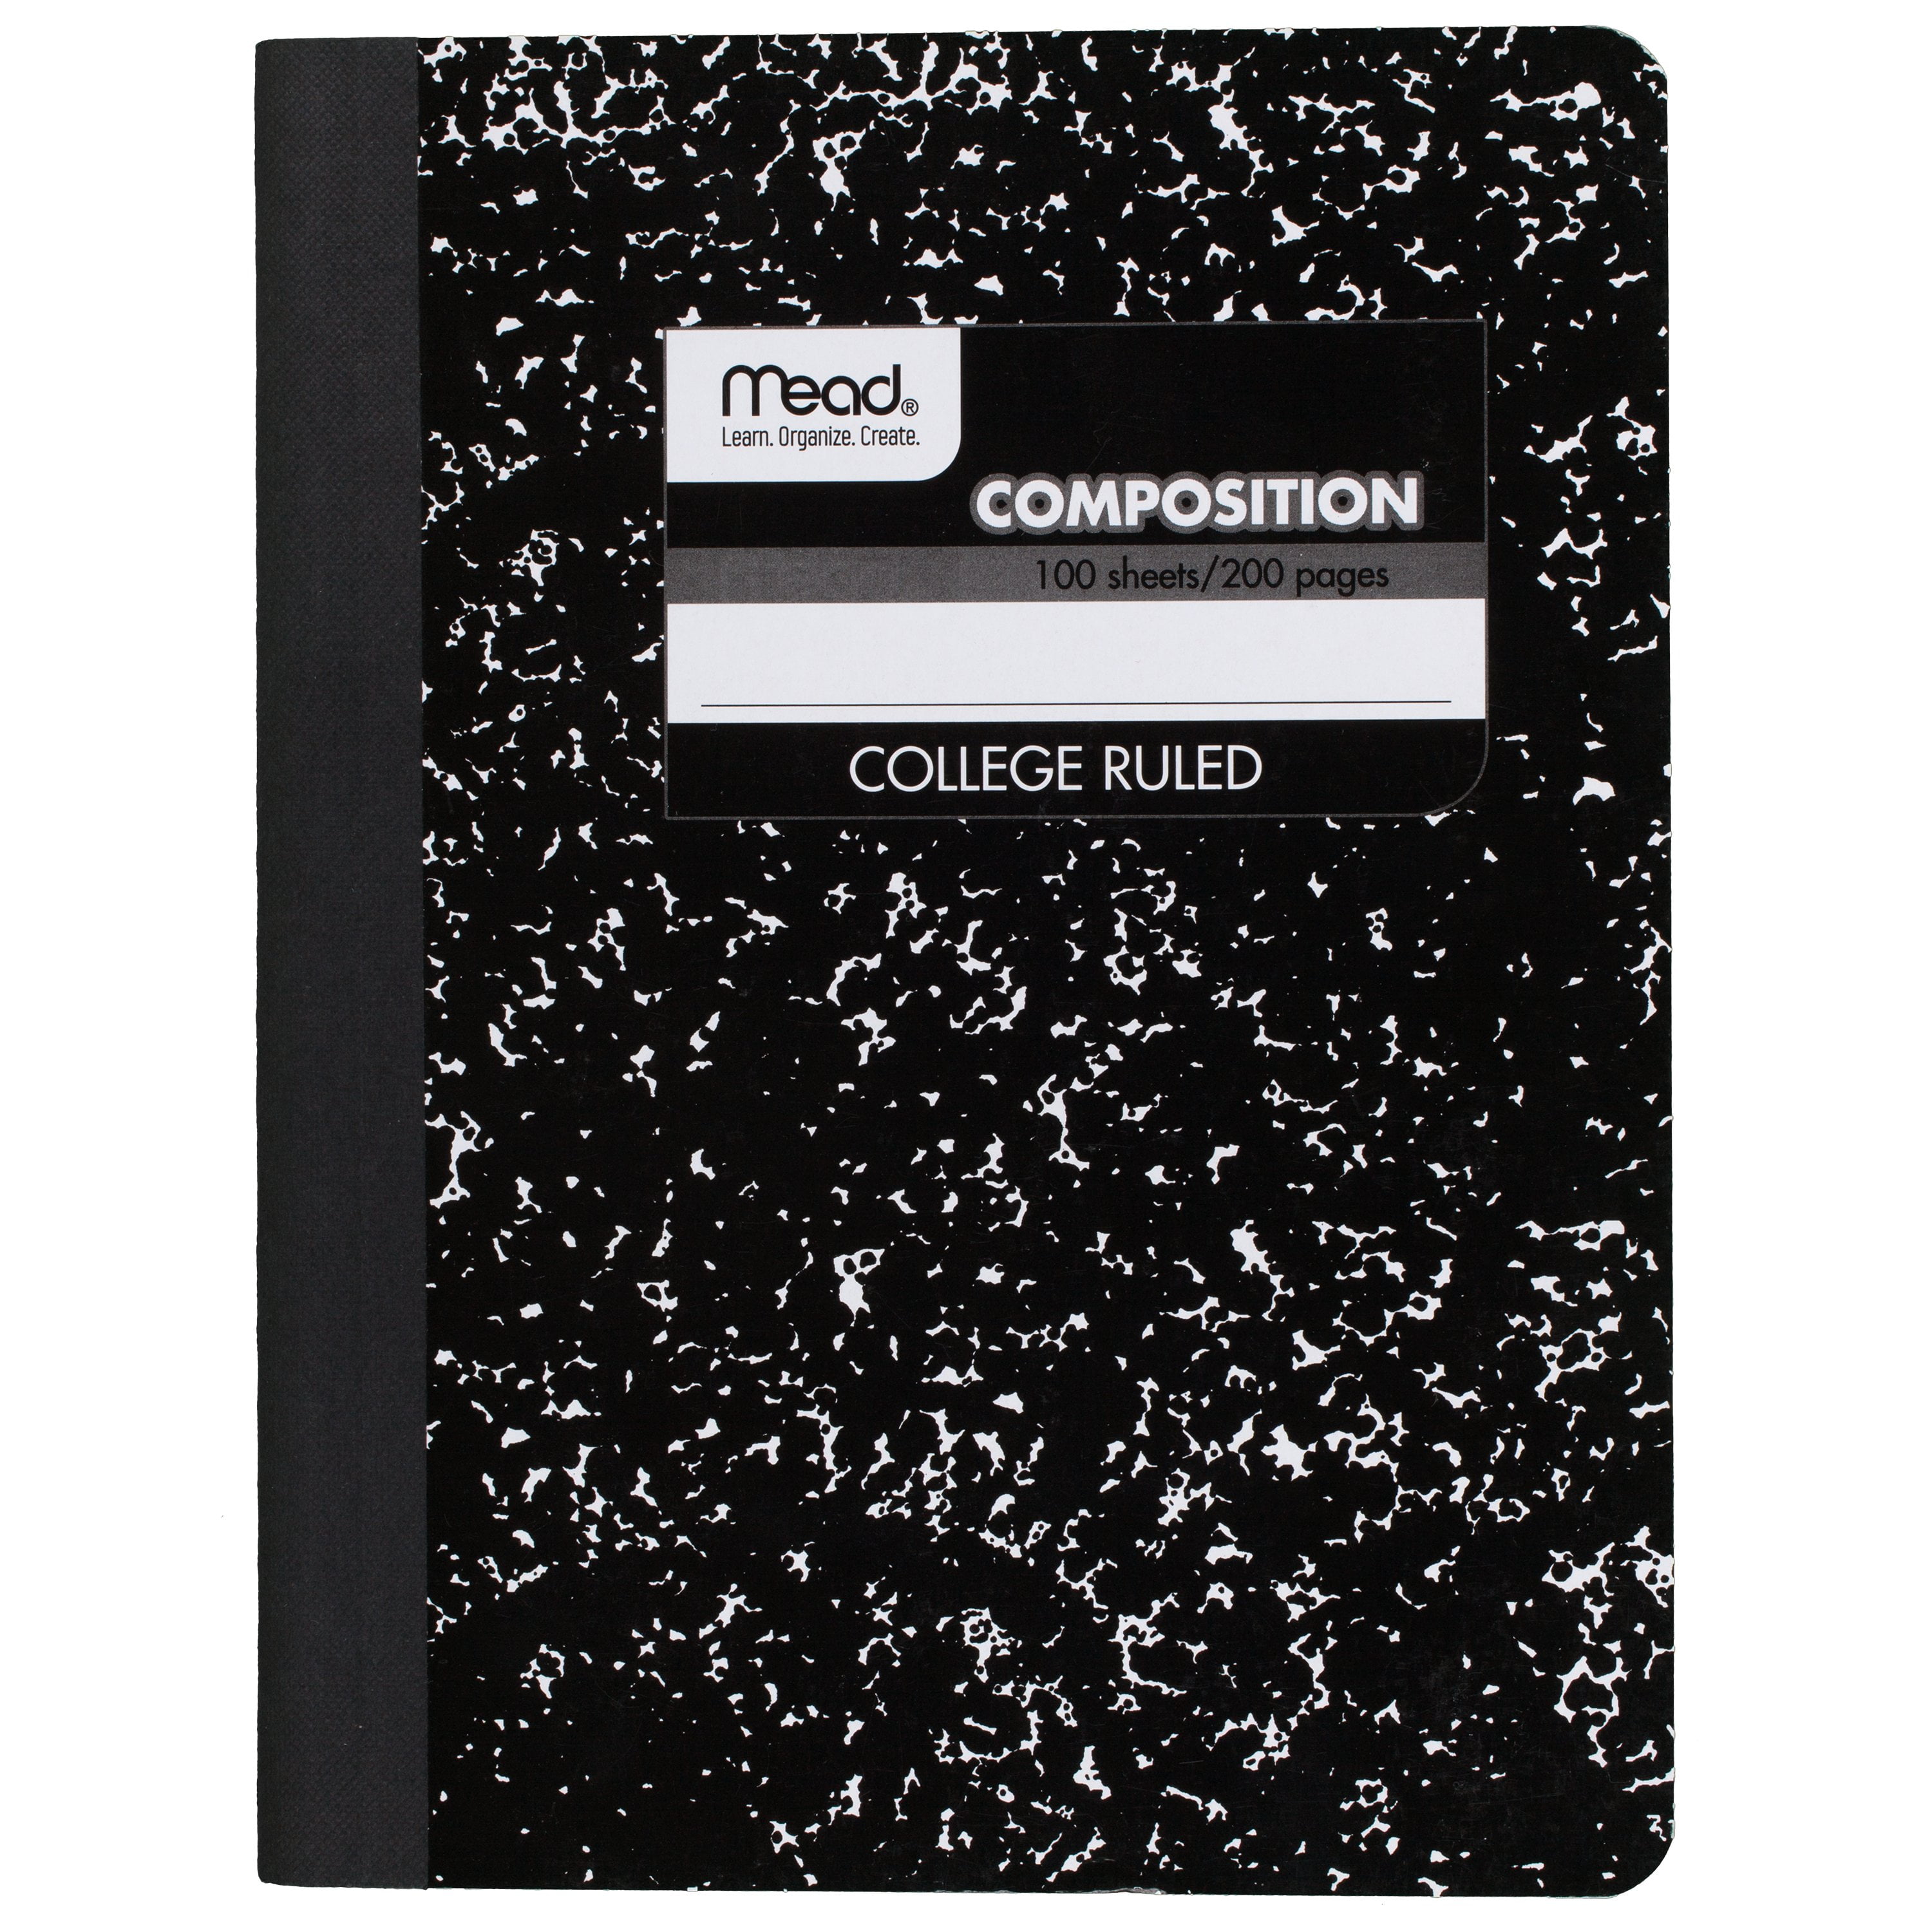 Pen+Gear Composition College Ruled Notebooks Bundle of 2 100 sheets each 